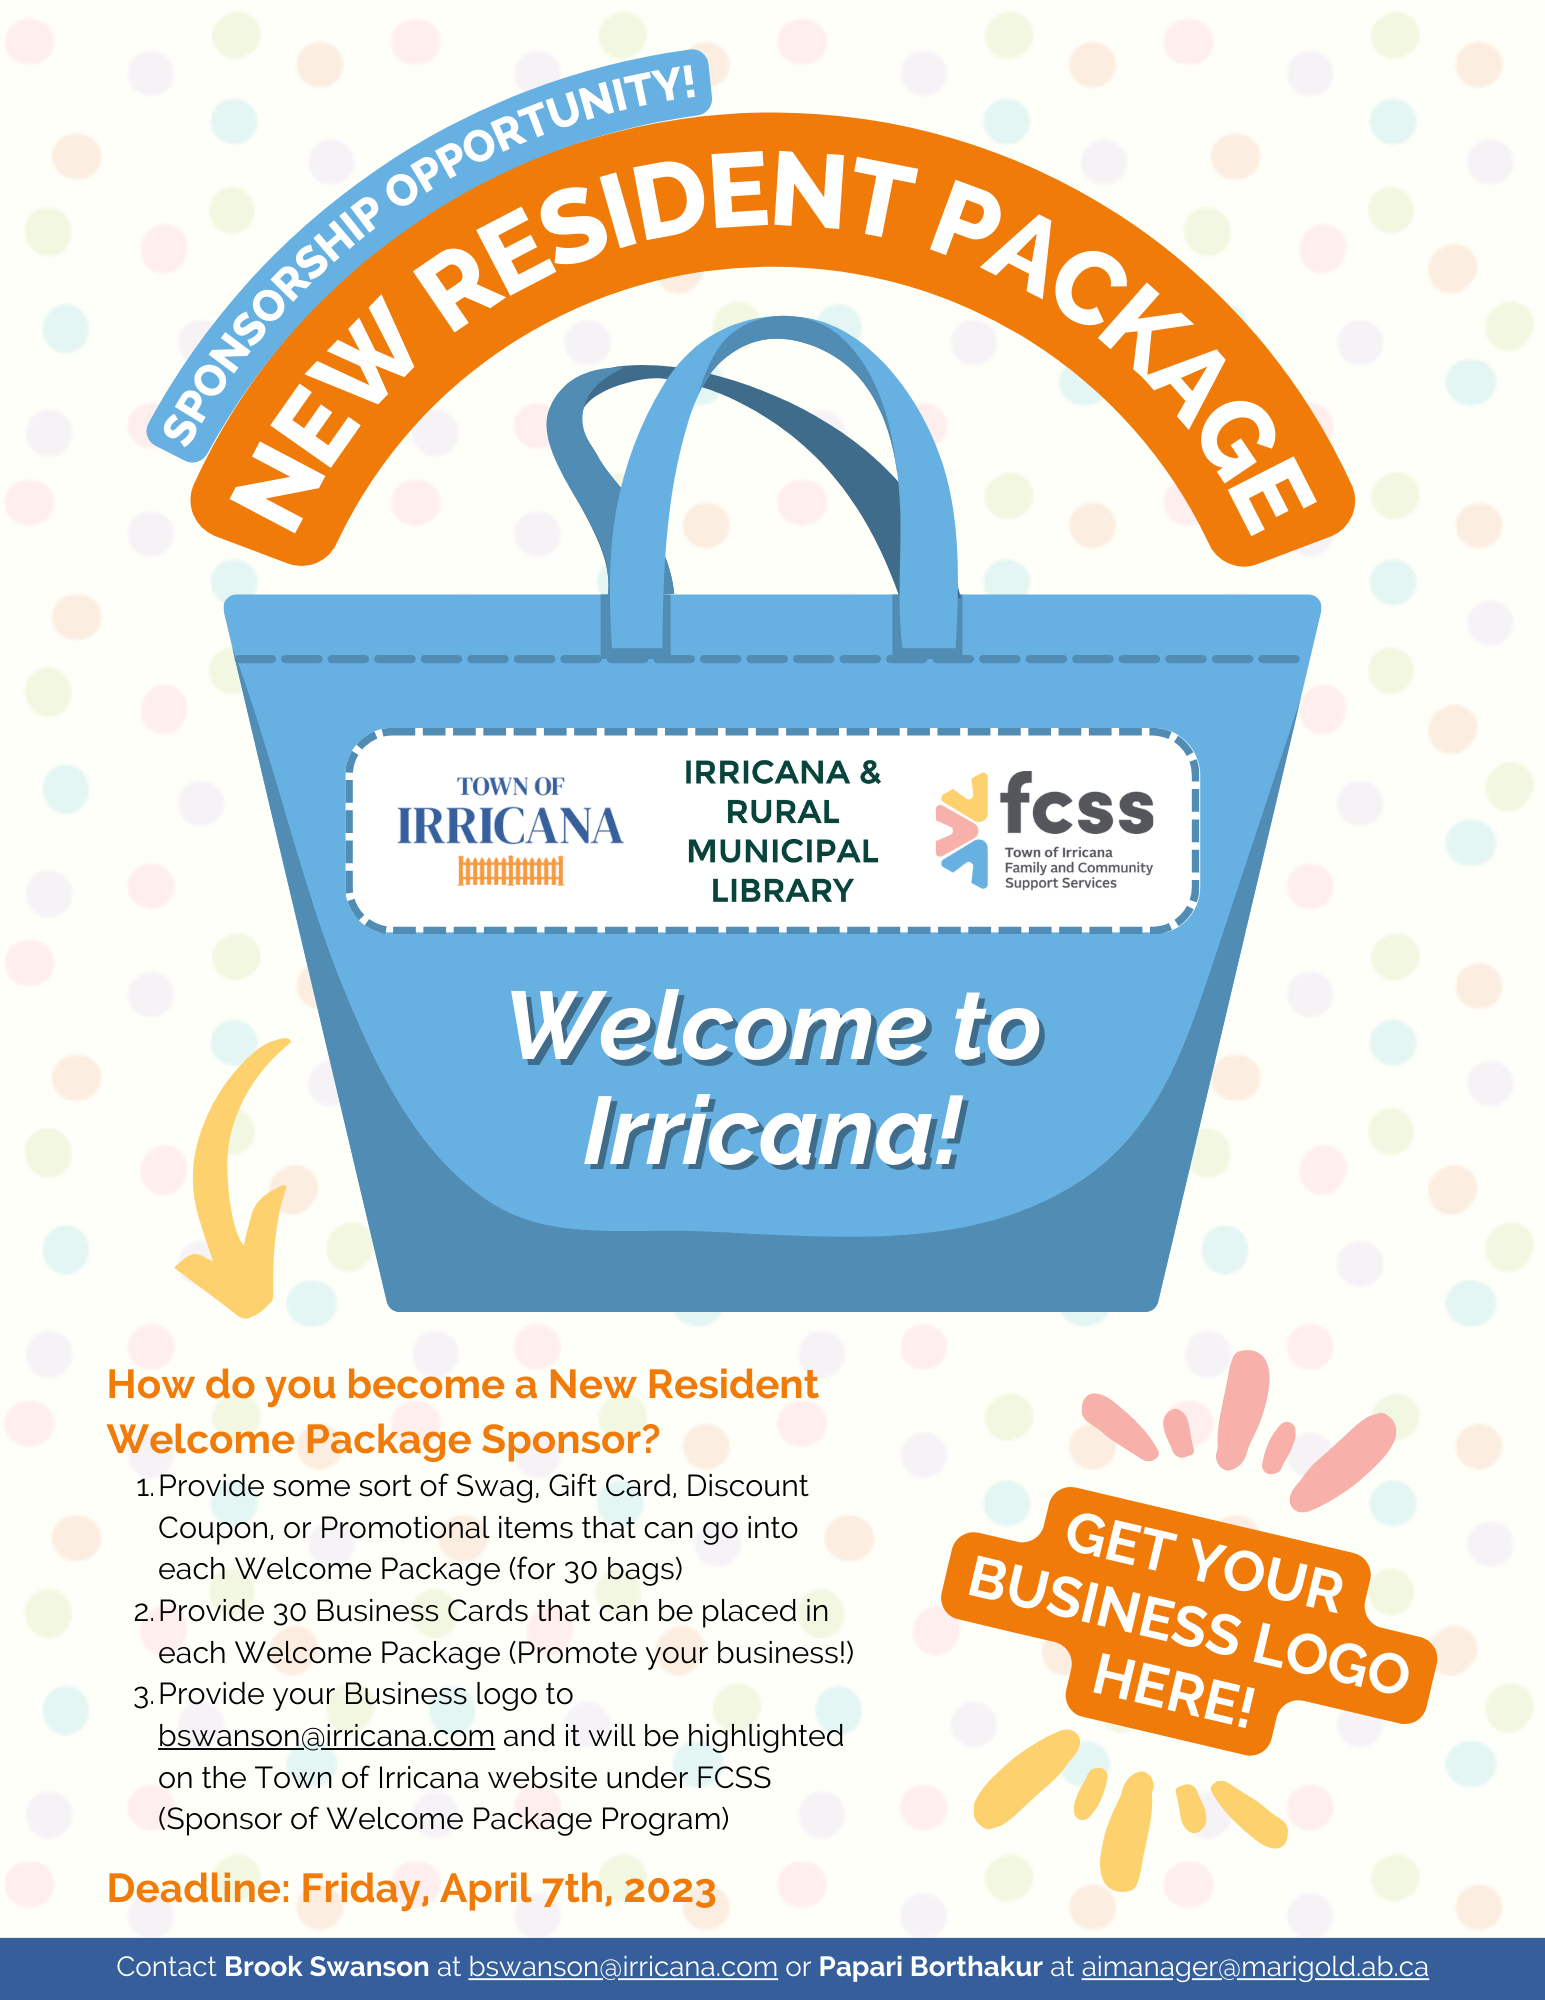 Town of Irricana New Resident Welcome Packages Sponsorship Opportunity 2023